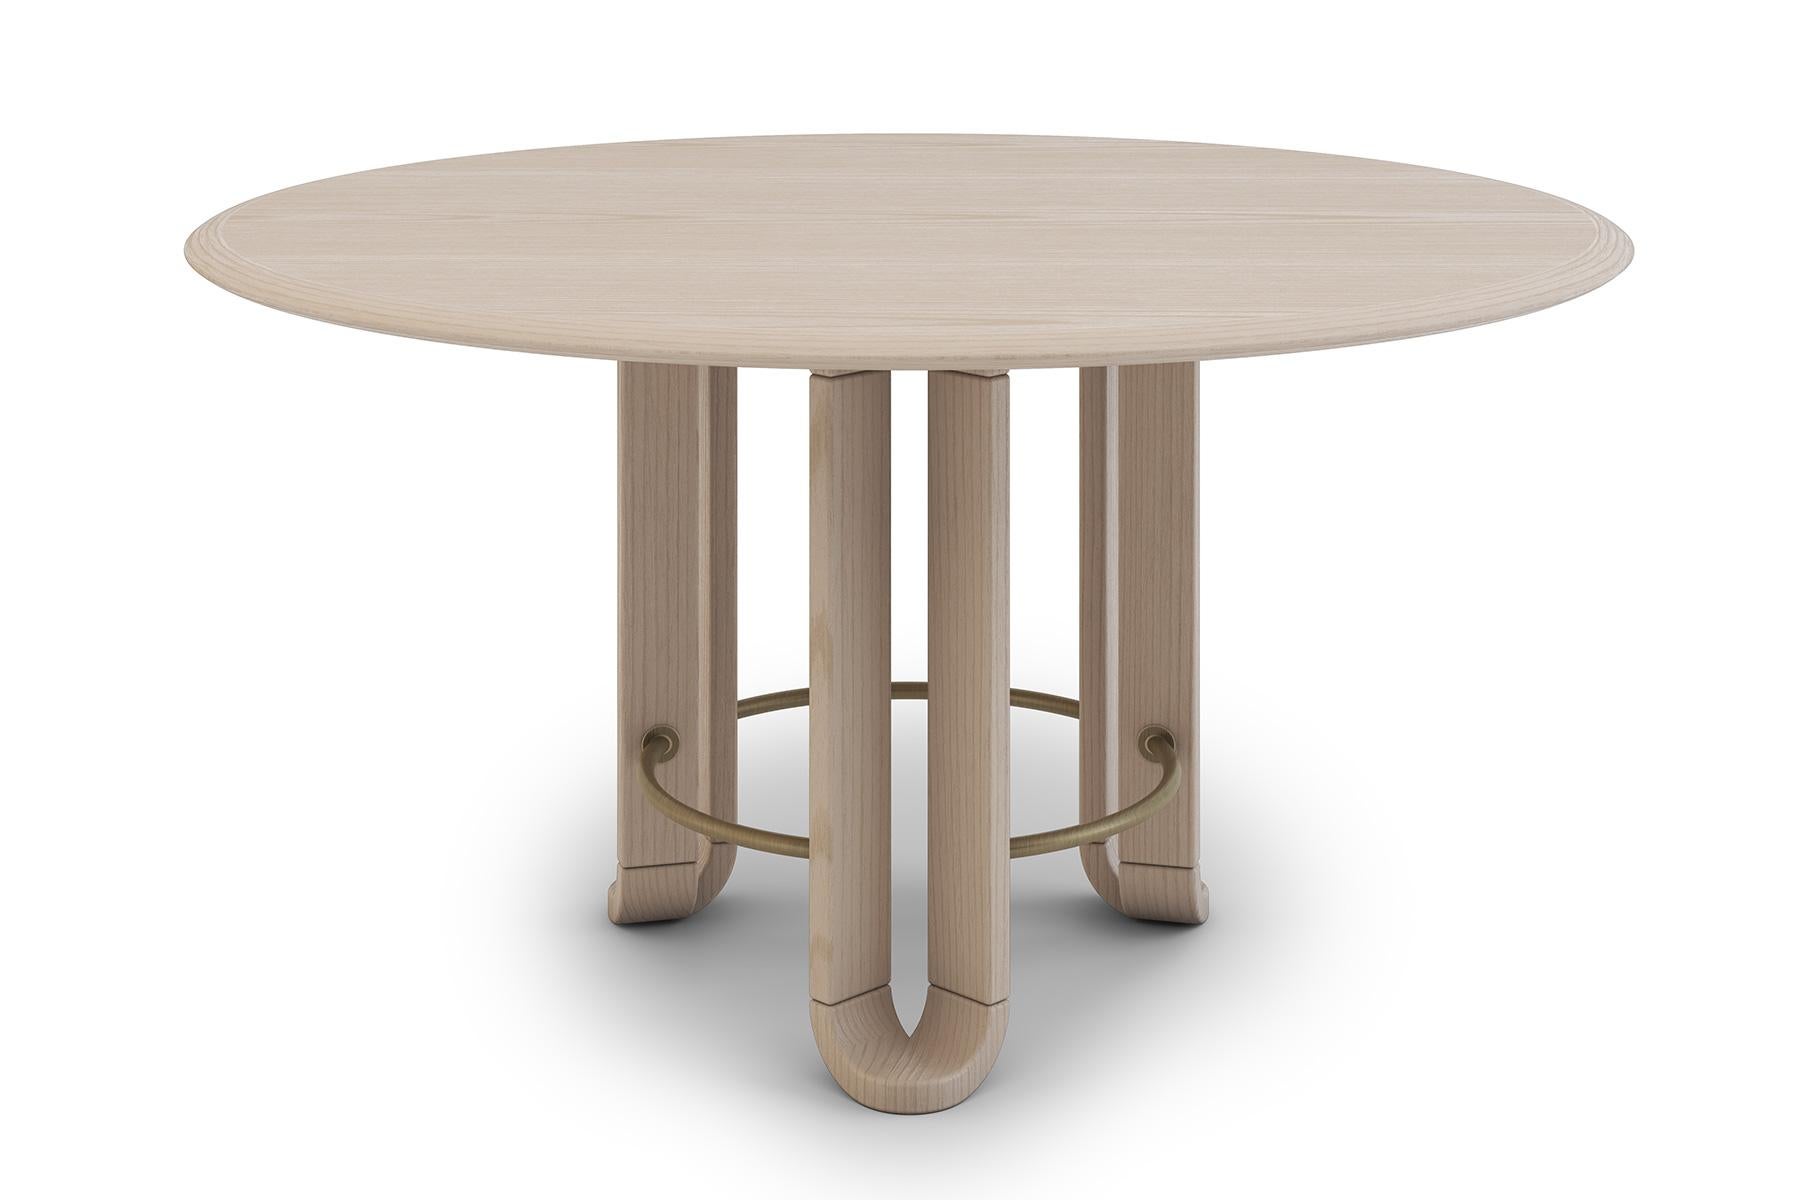 Unique Round Yaprak dining table by Feyzstudio
Dimensions: D 140 x 75 H
Materials: Walnut, maple, oak
Custom materials, sizing and finishes available as item is made to order.

FEYZ Studio is a New York based, multi-disciplinary design studio